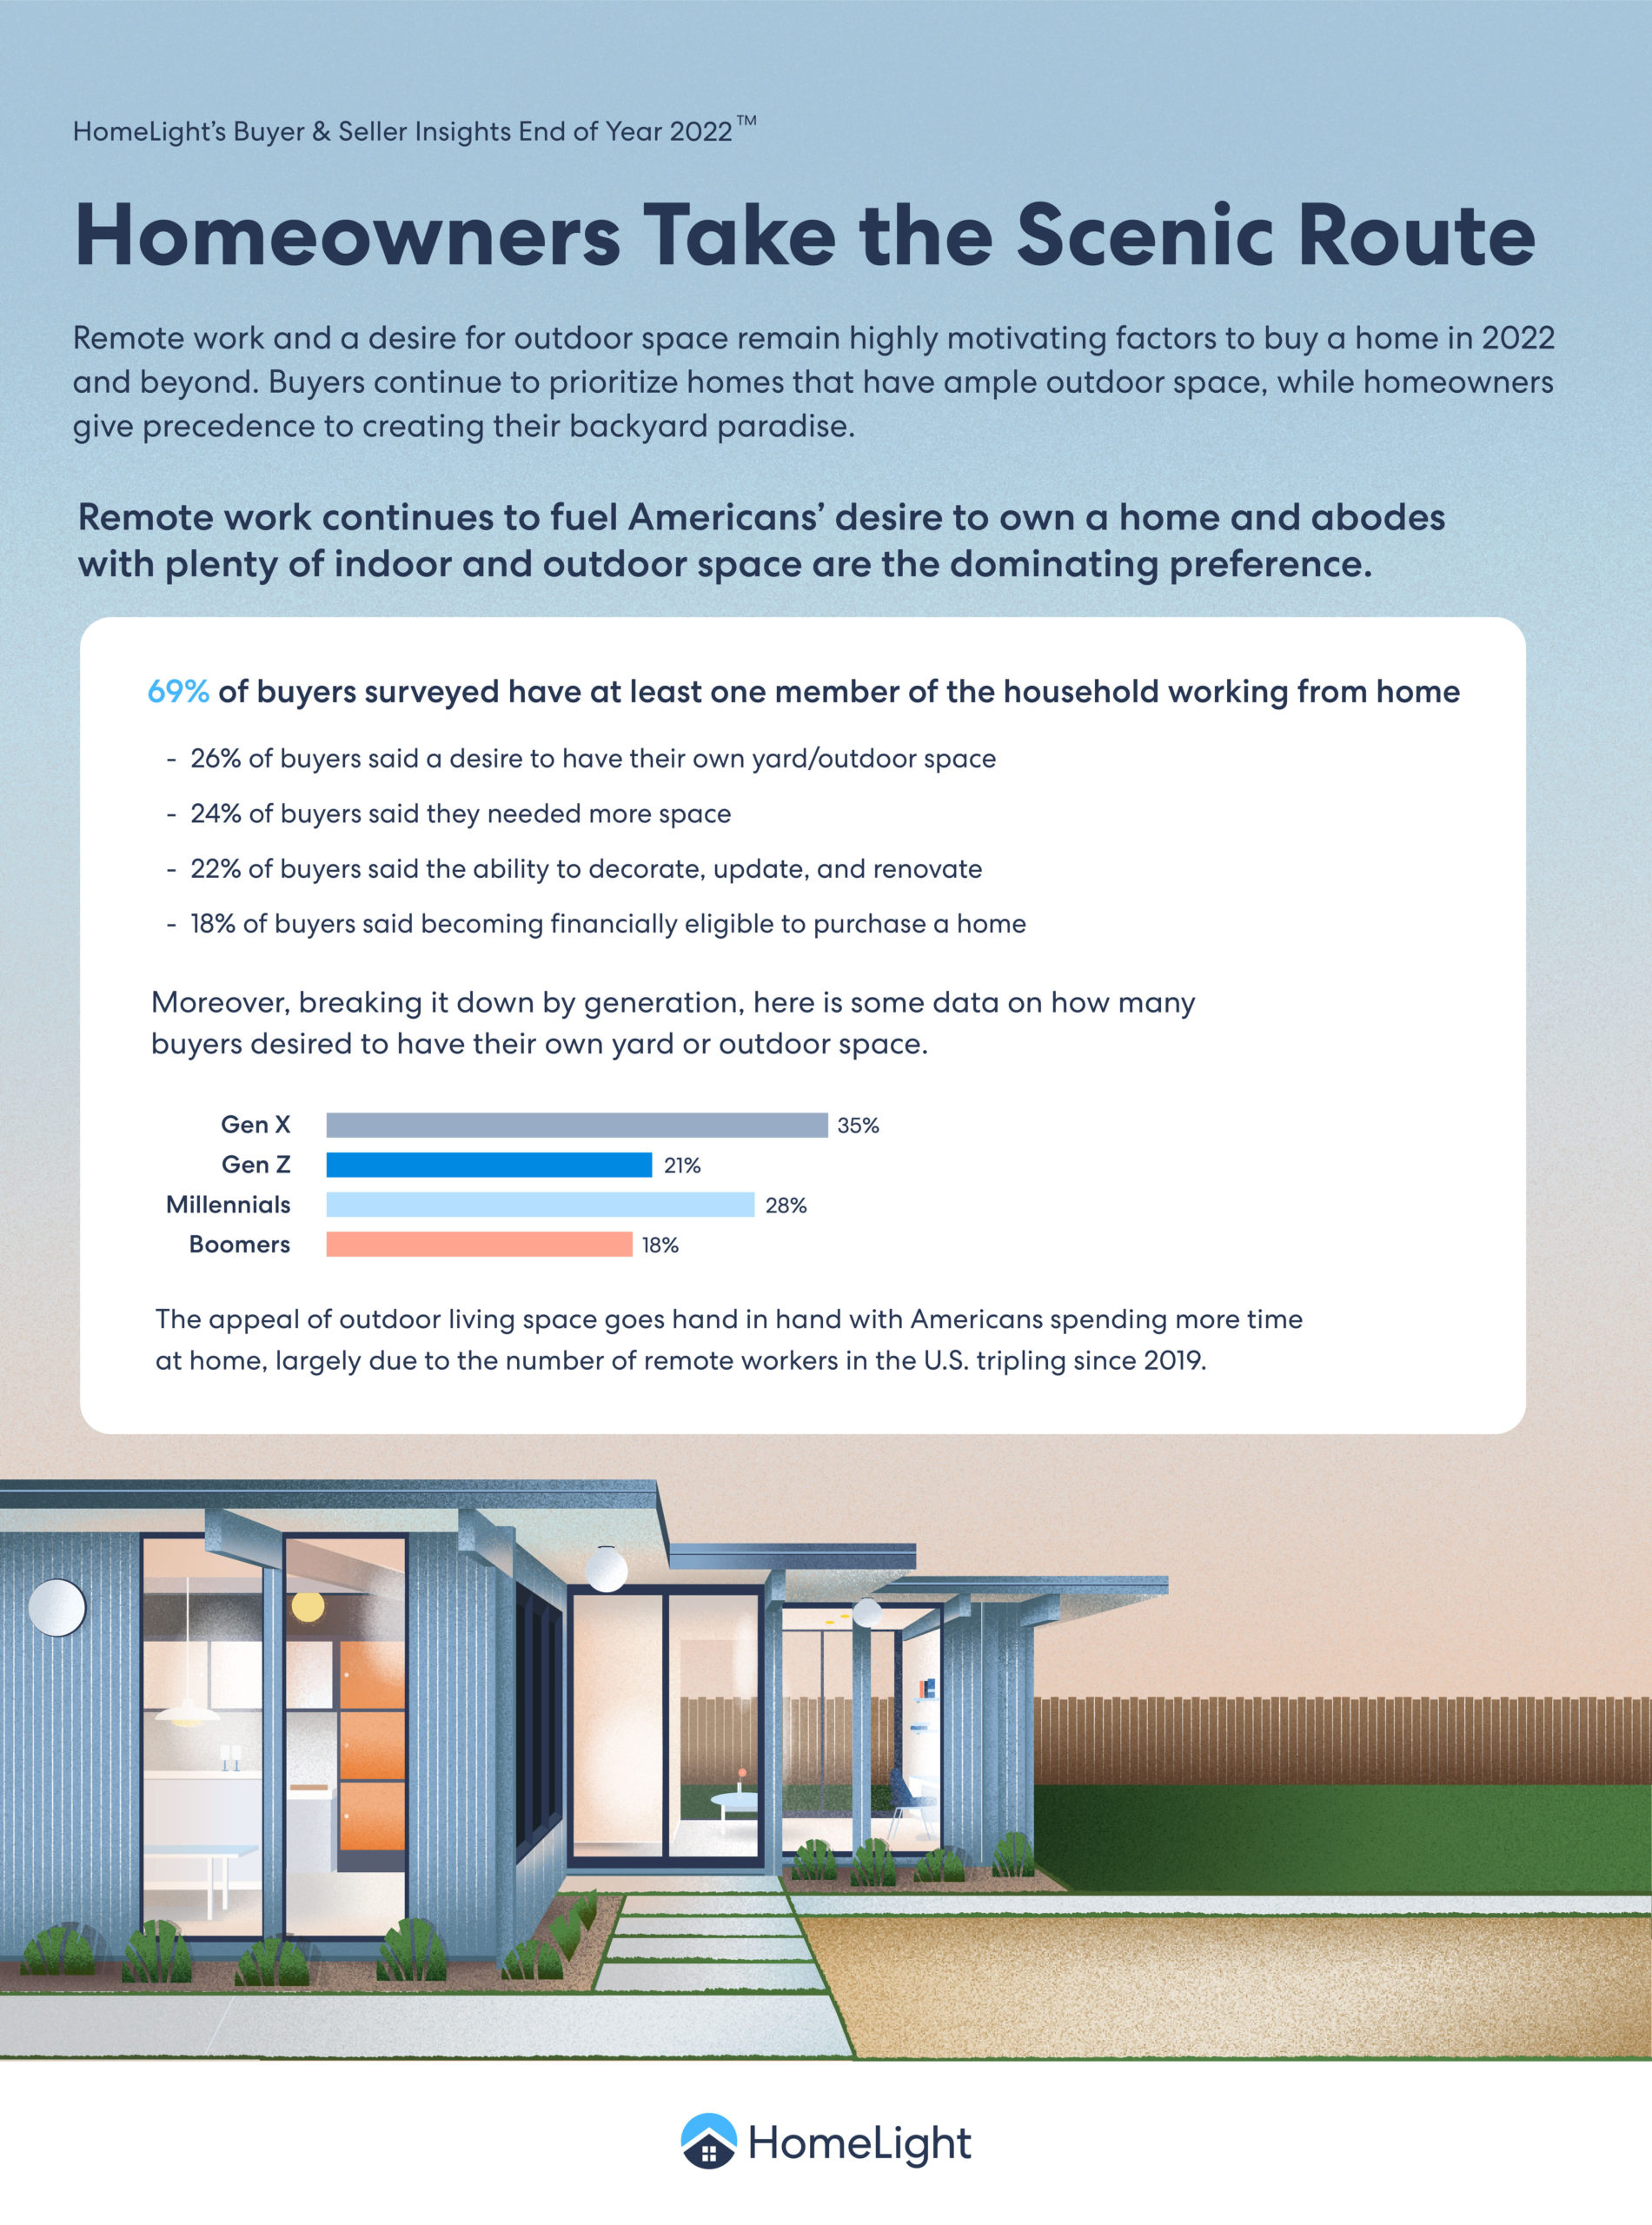 Infographic on how buyers continue to prioritize homes that have outdoor space